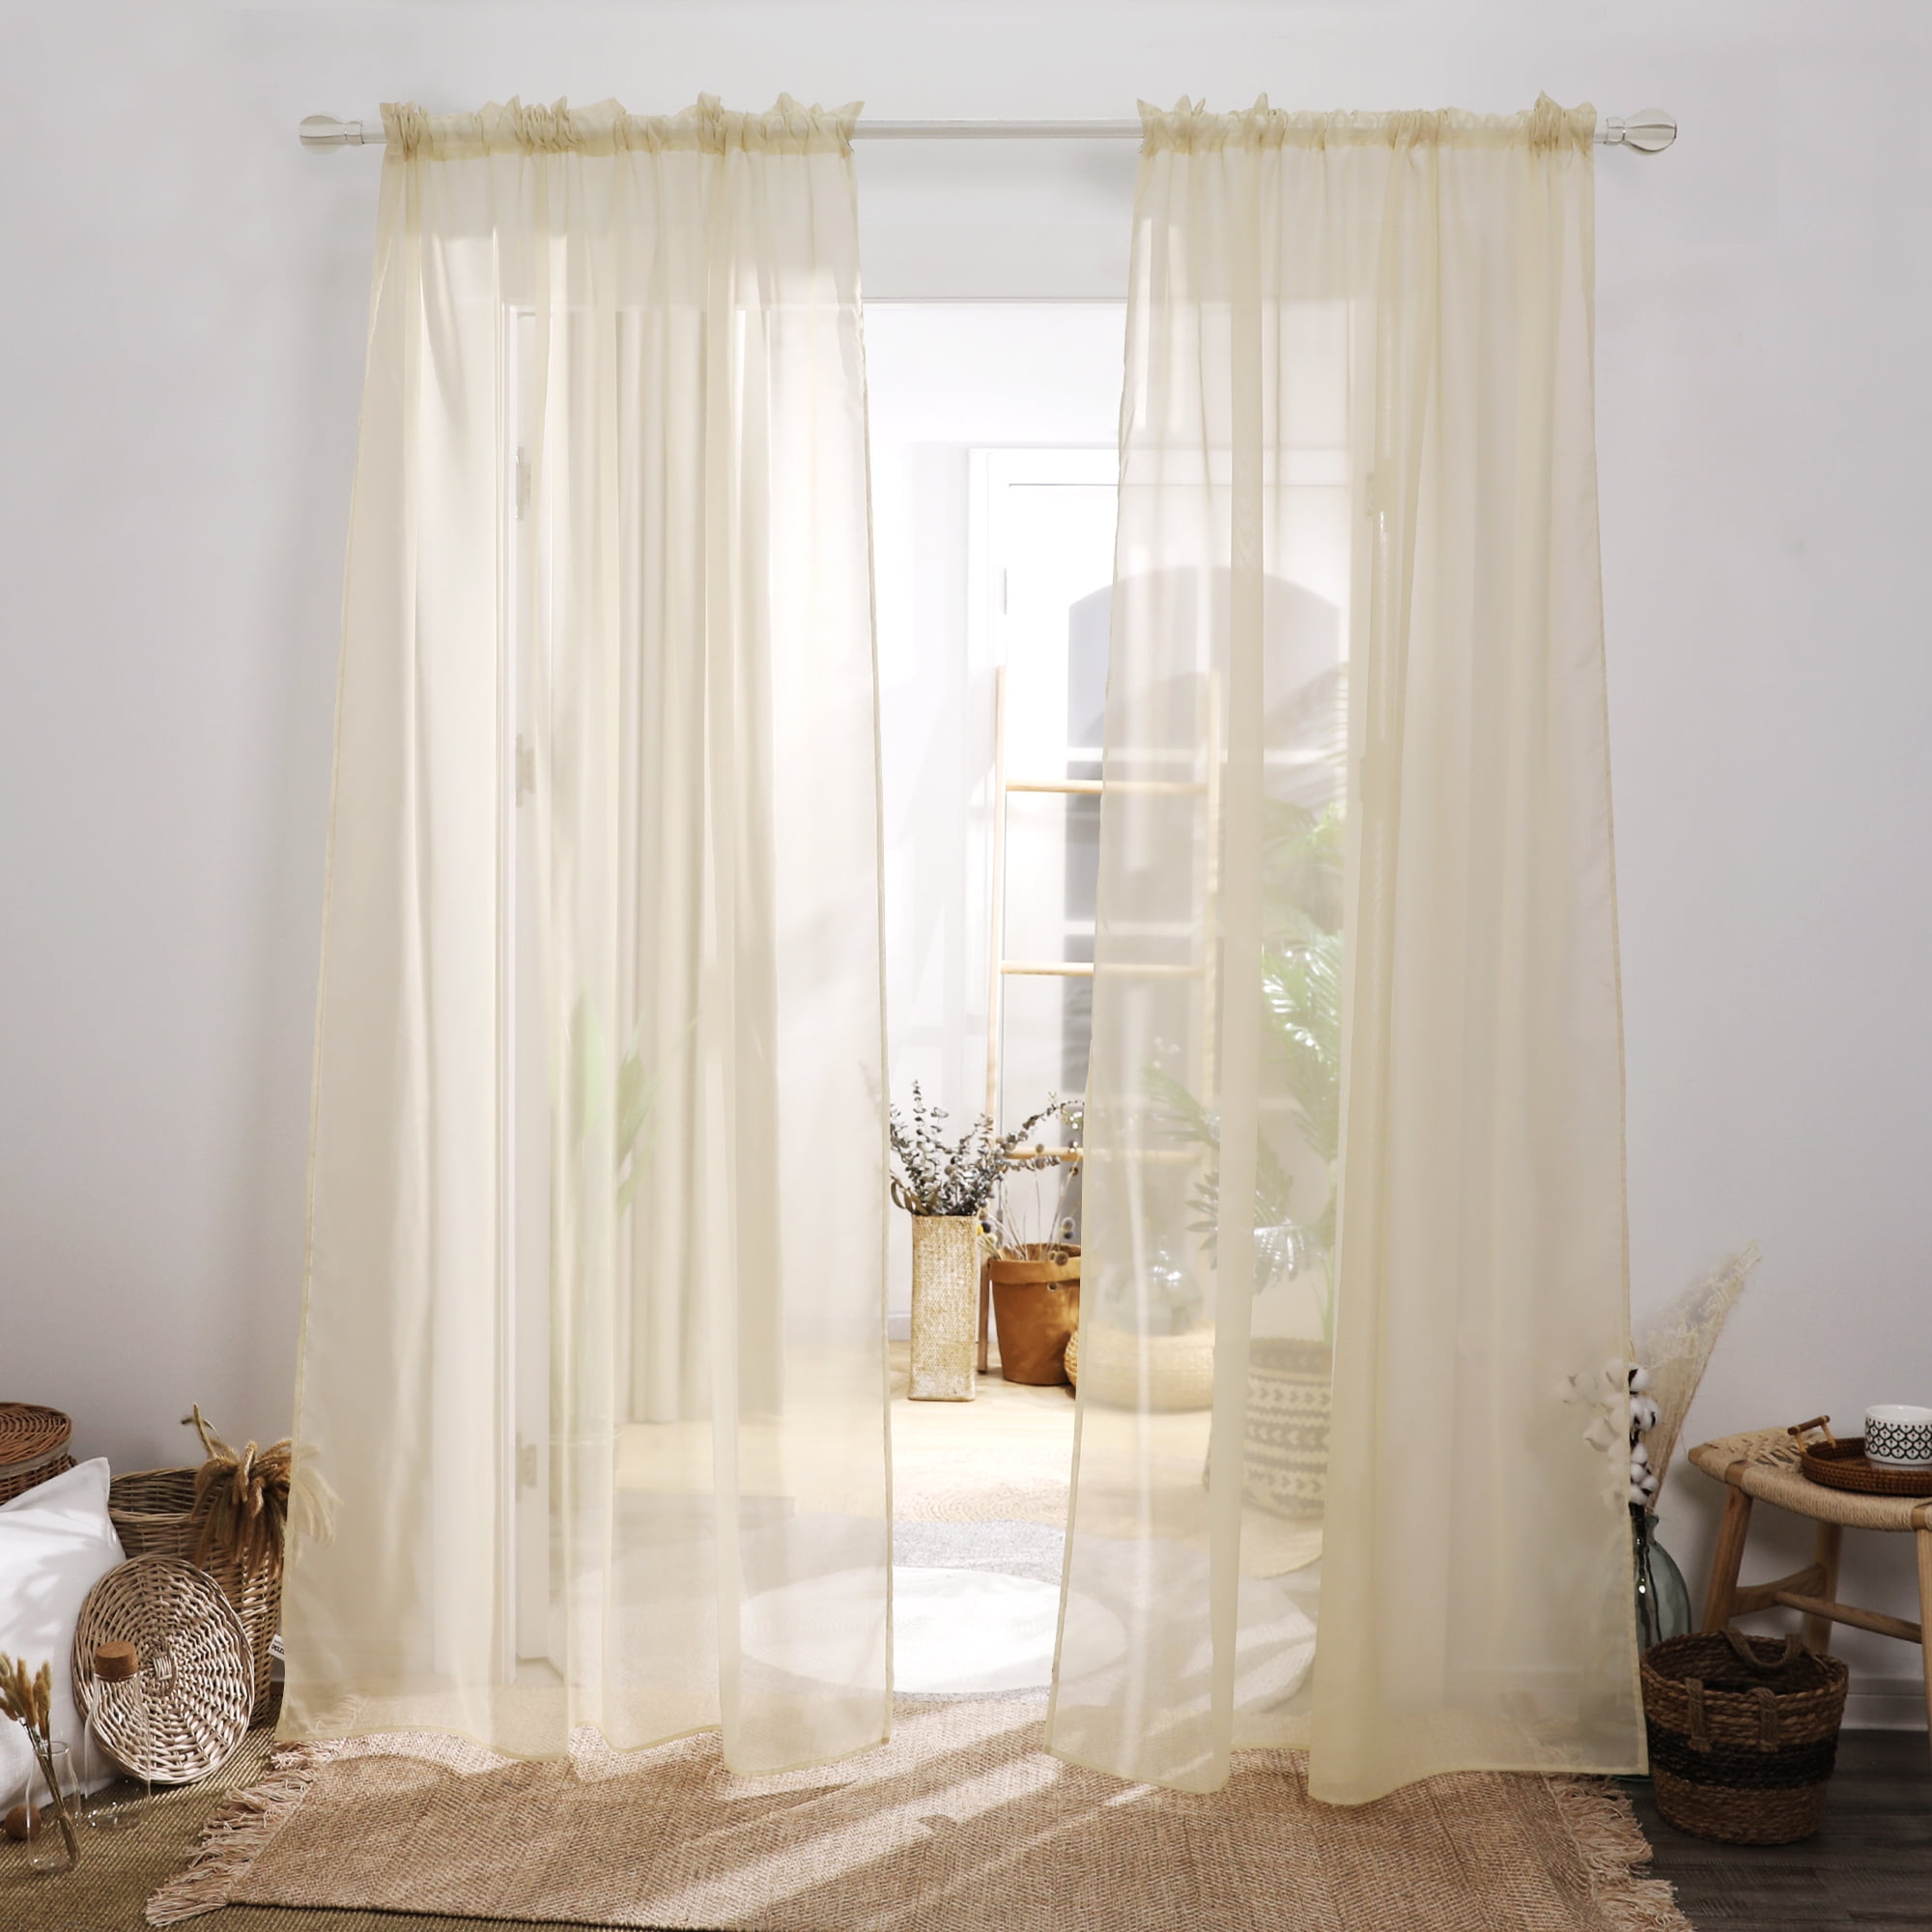 2 PCS Solid Sheer Window Curtains/Drape/Panels/Treatment Clear Grey/Silver 